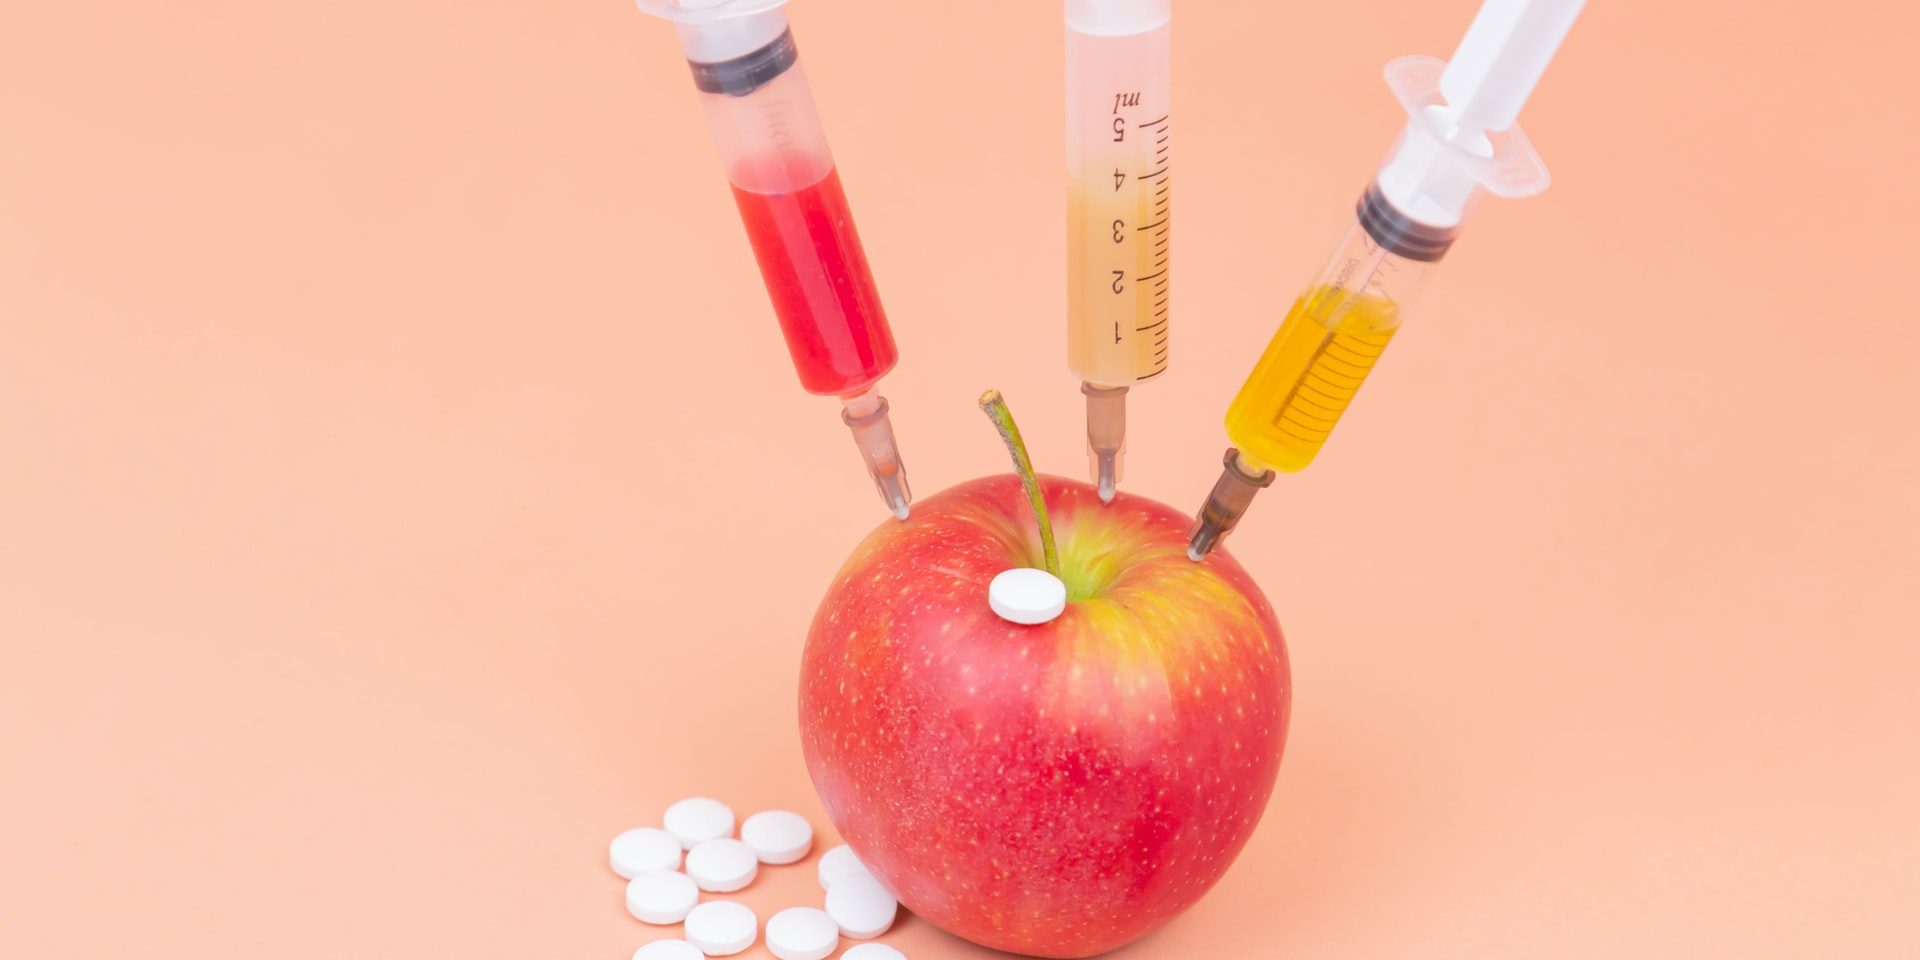 Syringes with different chemicals injections and tablets in a red apple on an orange background